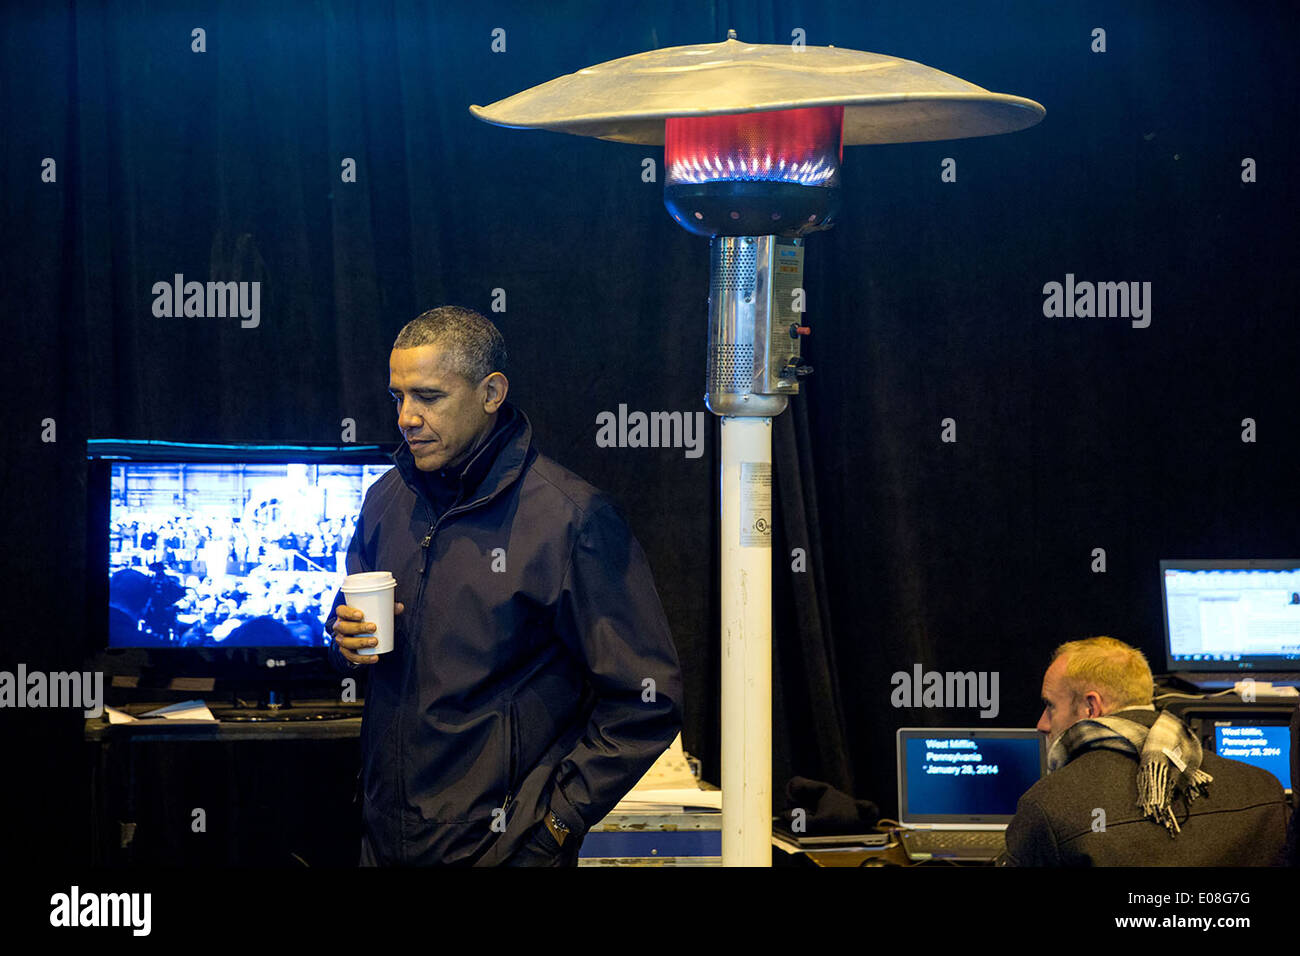 US President Barack Obama drinks tea backstage prior to delivering remarks about the retirement policies highlighted in the State of the Union address, at the United States Steel Corporation Irvin Plant January 29, 2014 in West Mifflin, Pennsylvania. Stock Photo